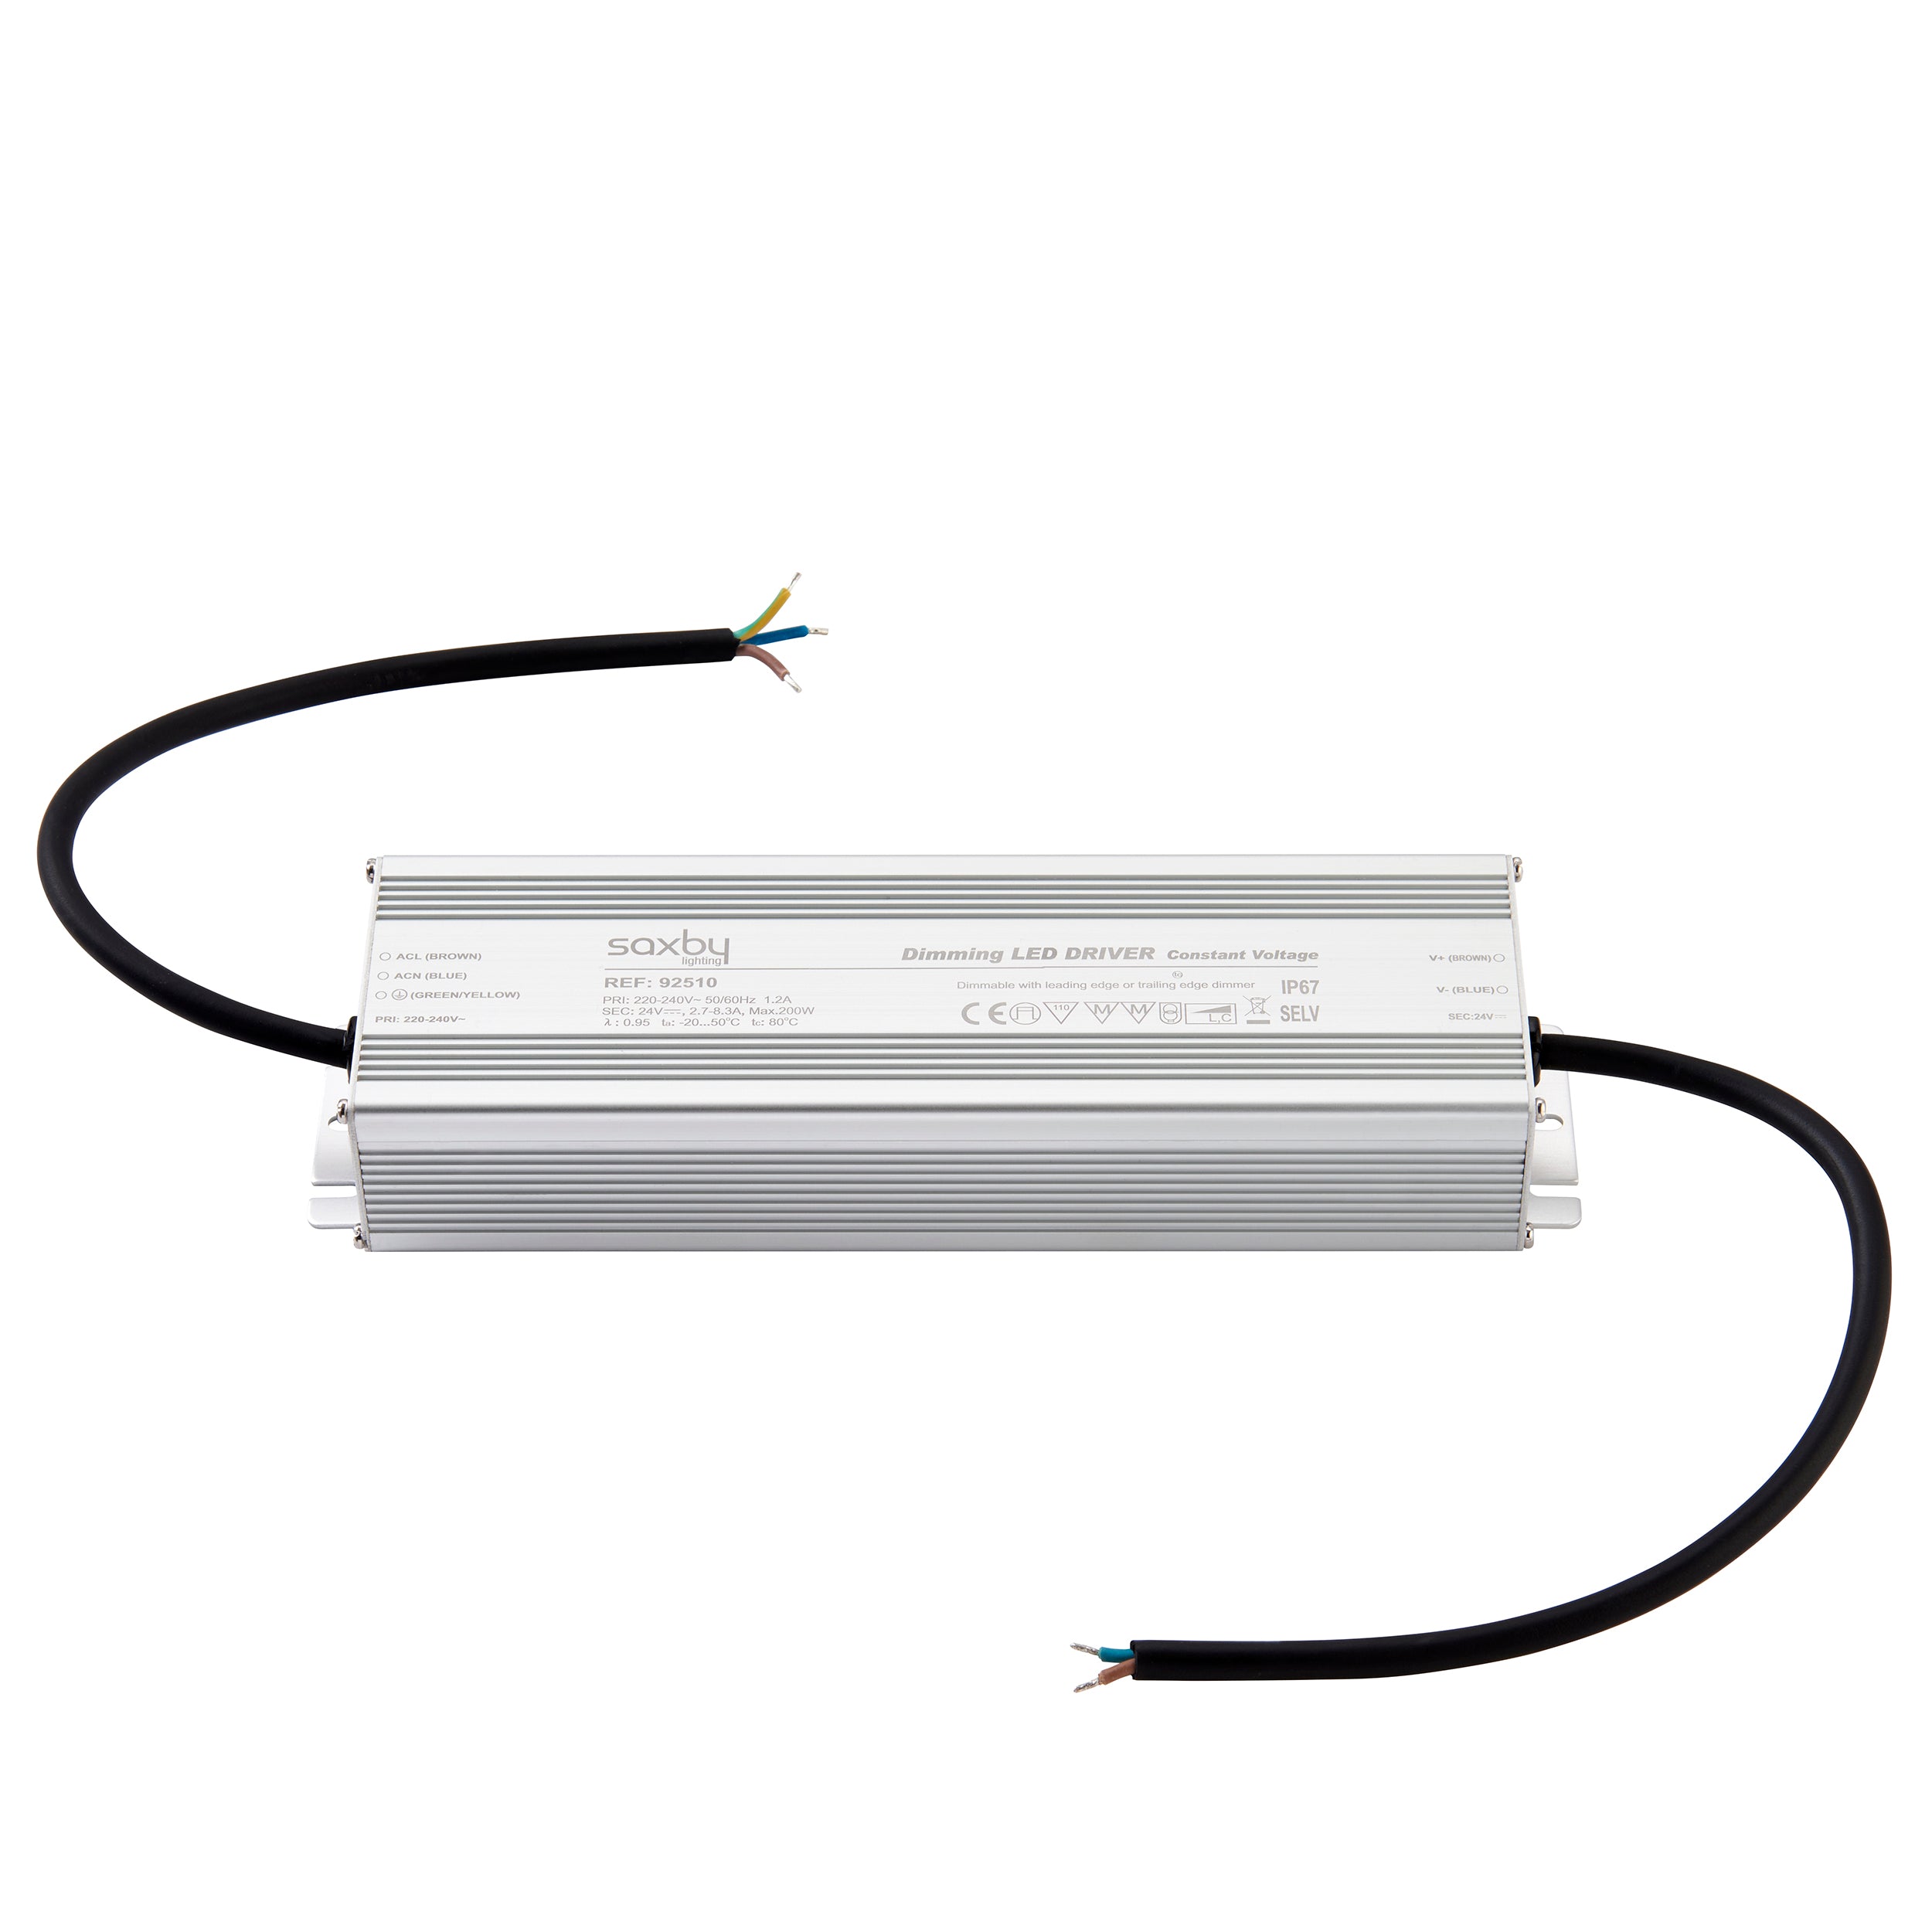 LED Driver Constant Voltage 24V 200W Dimmable IP67